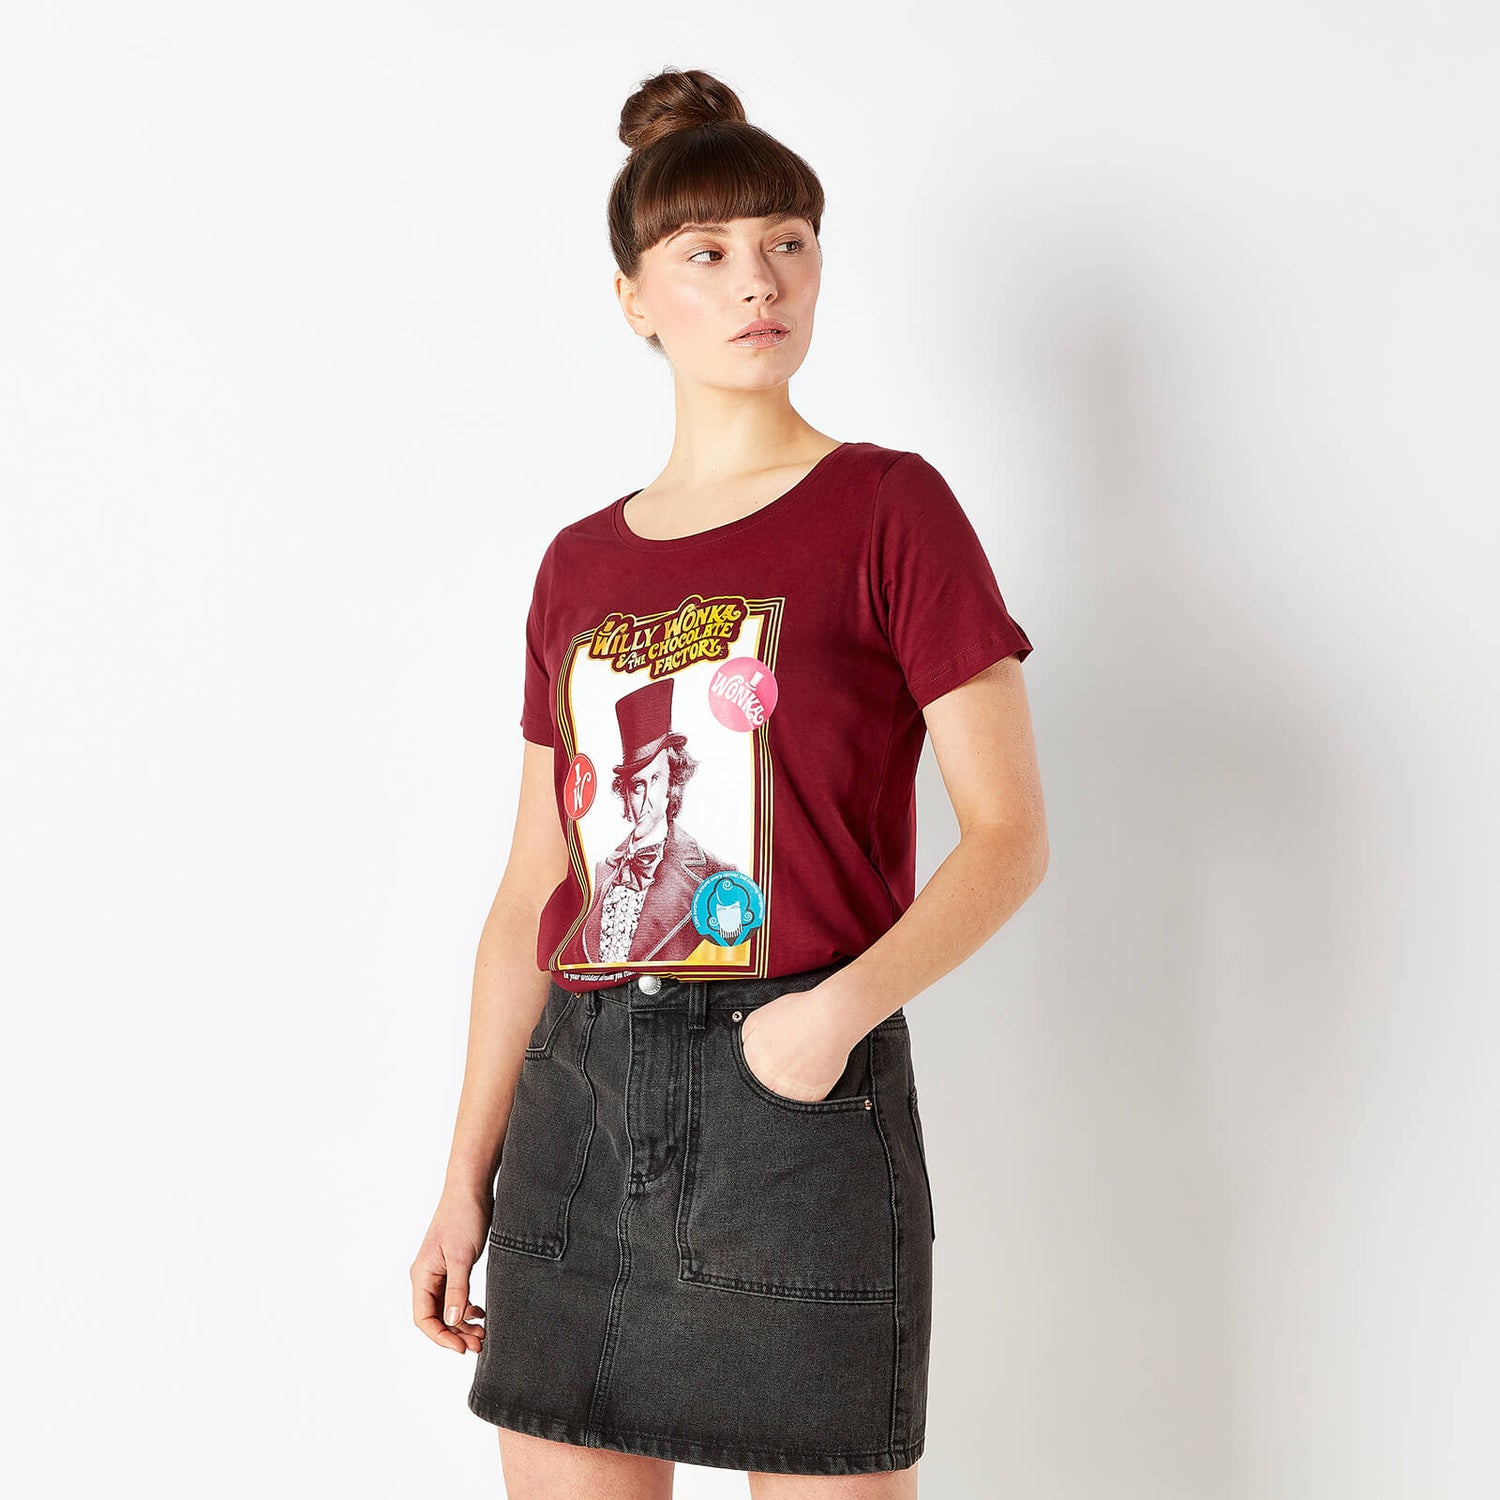 Willy Wonka & The Chocolate Factory Retro Cover Women's T-Shirt - Bordeaux